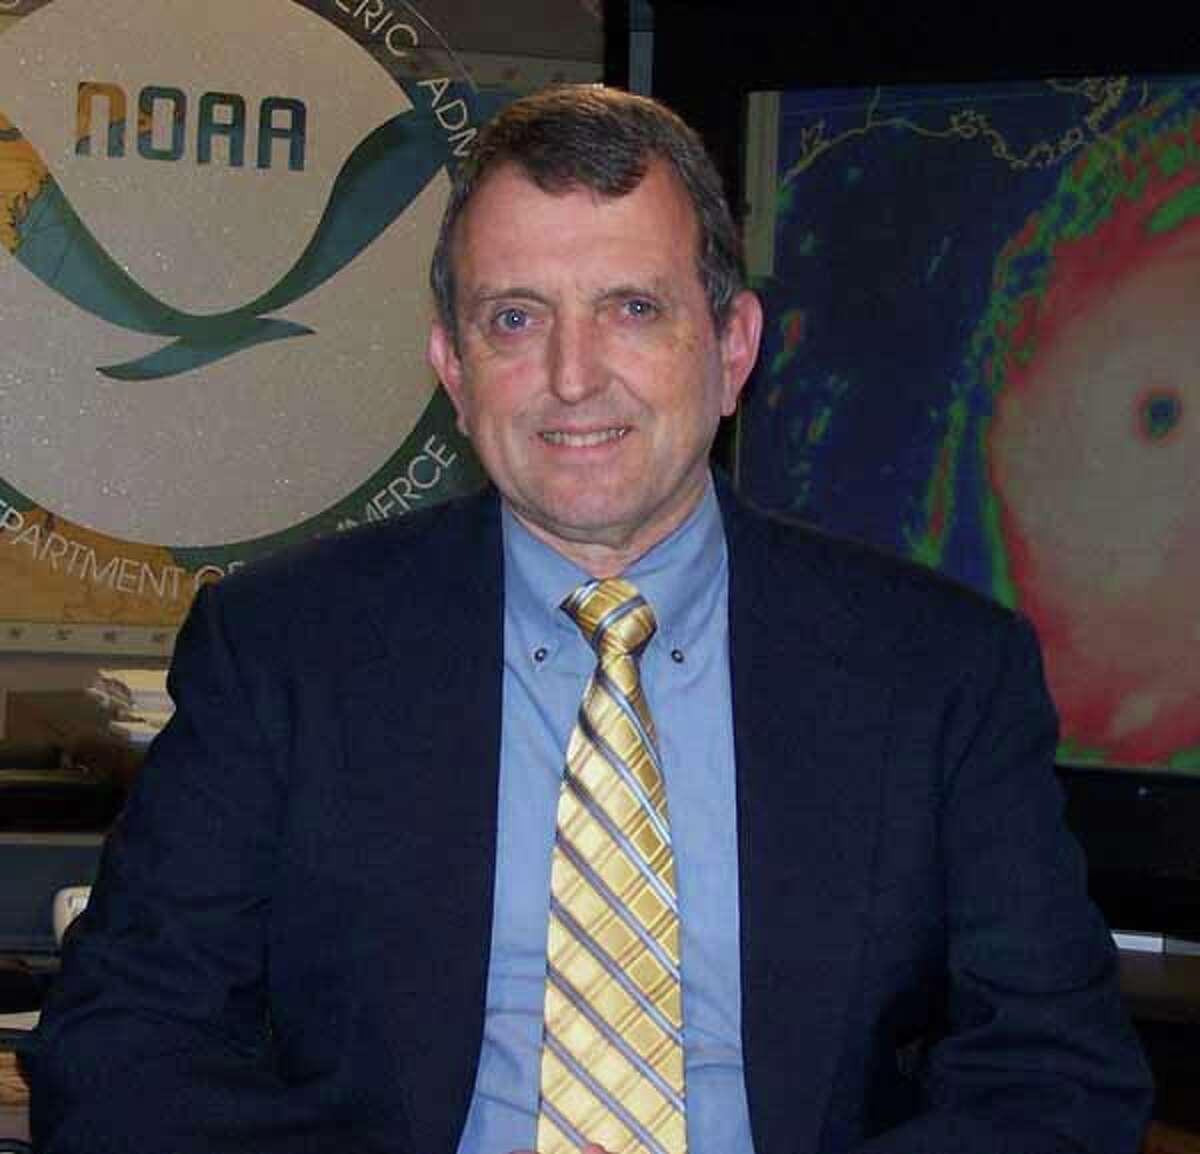 In this photo provided by NOAA Communications & External Affairs, National Hurricane Center Director Bill Read is shown. Read is announcing plans to retire June 1, 2012. Read says in a statement Saturday from the Miami-based hurricane center that he intended to stay on the job no longer than five years. Read has been in the post since 2008. (AP Photo/NOAA Communications & External Affairs)